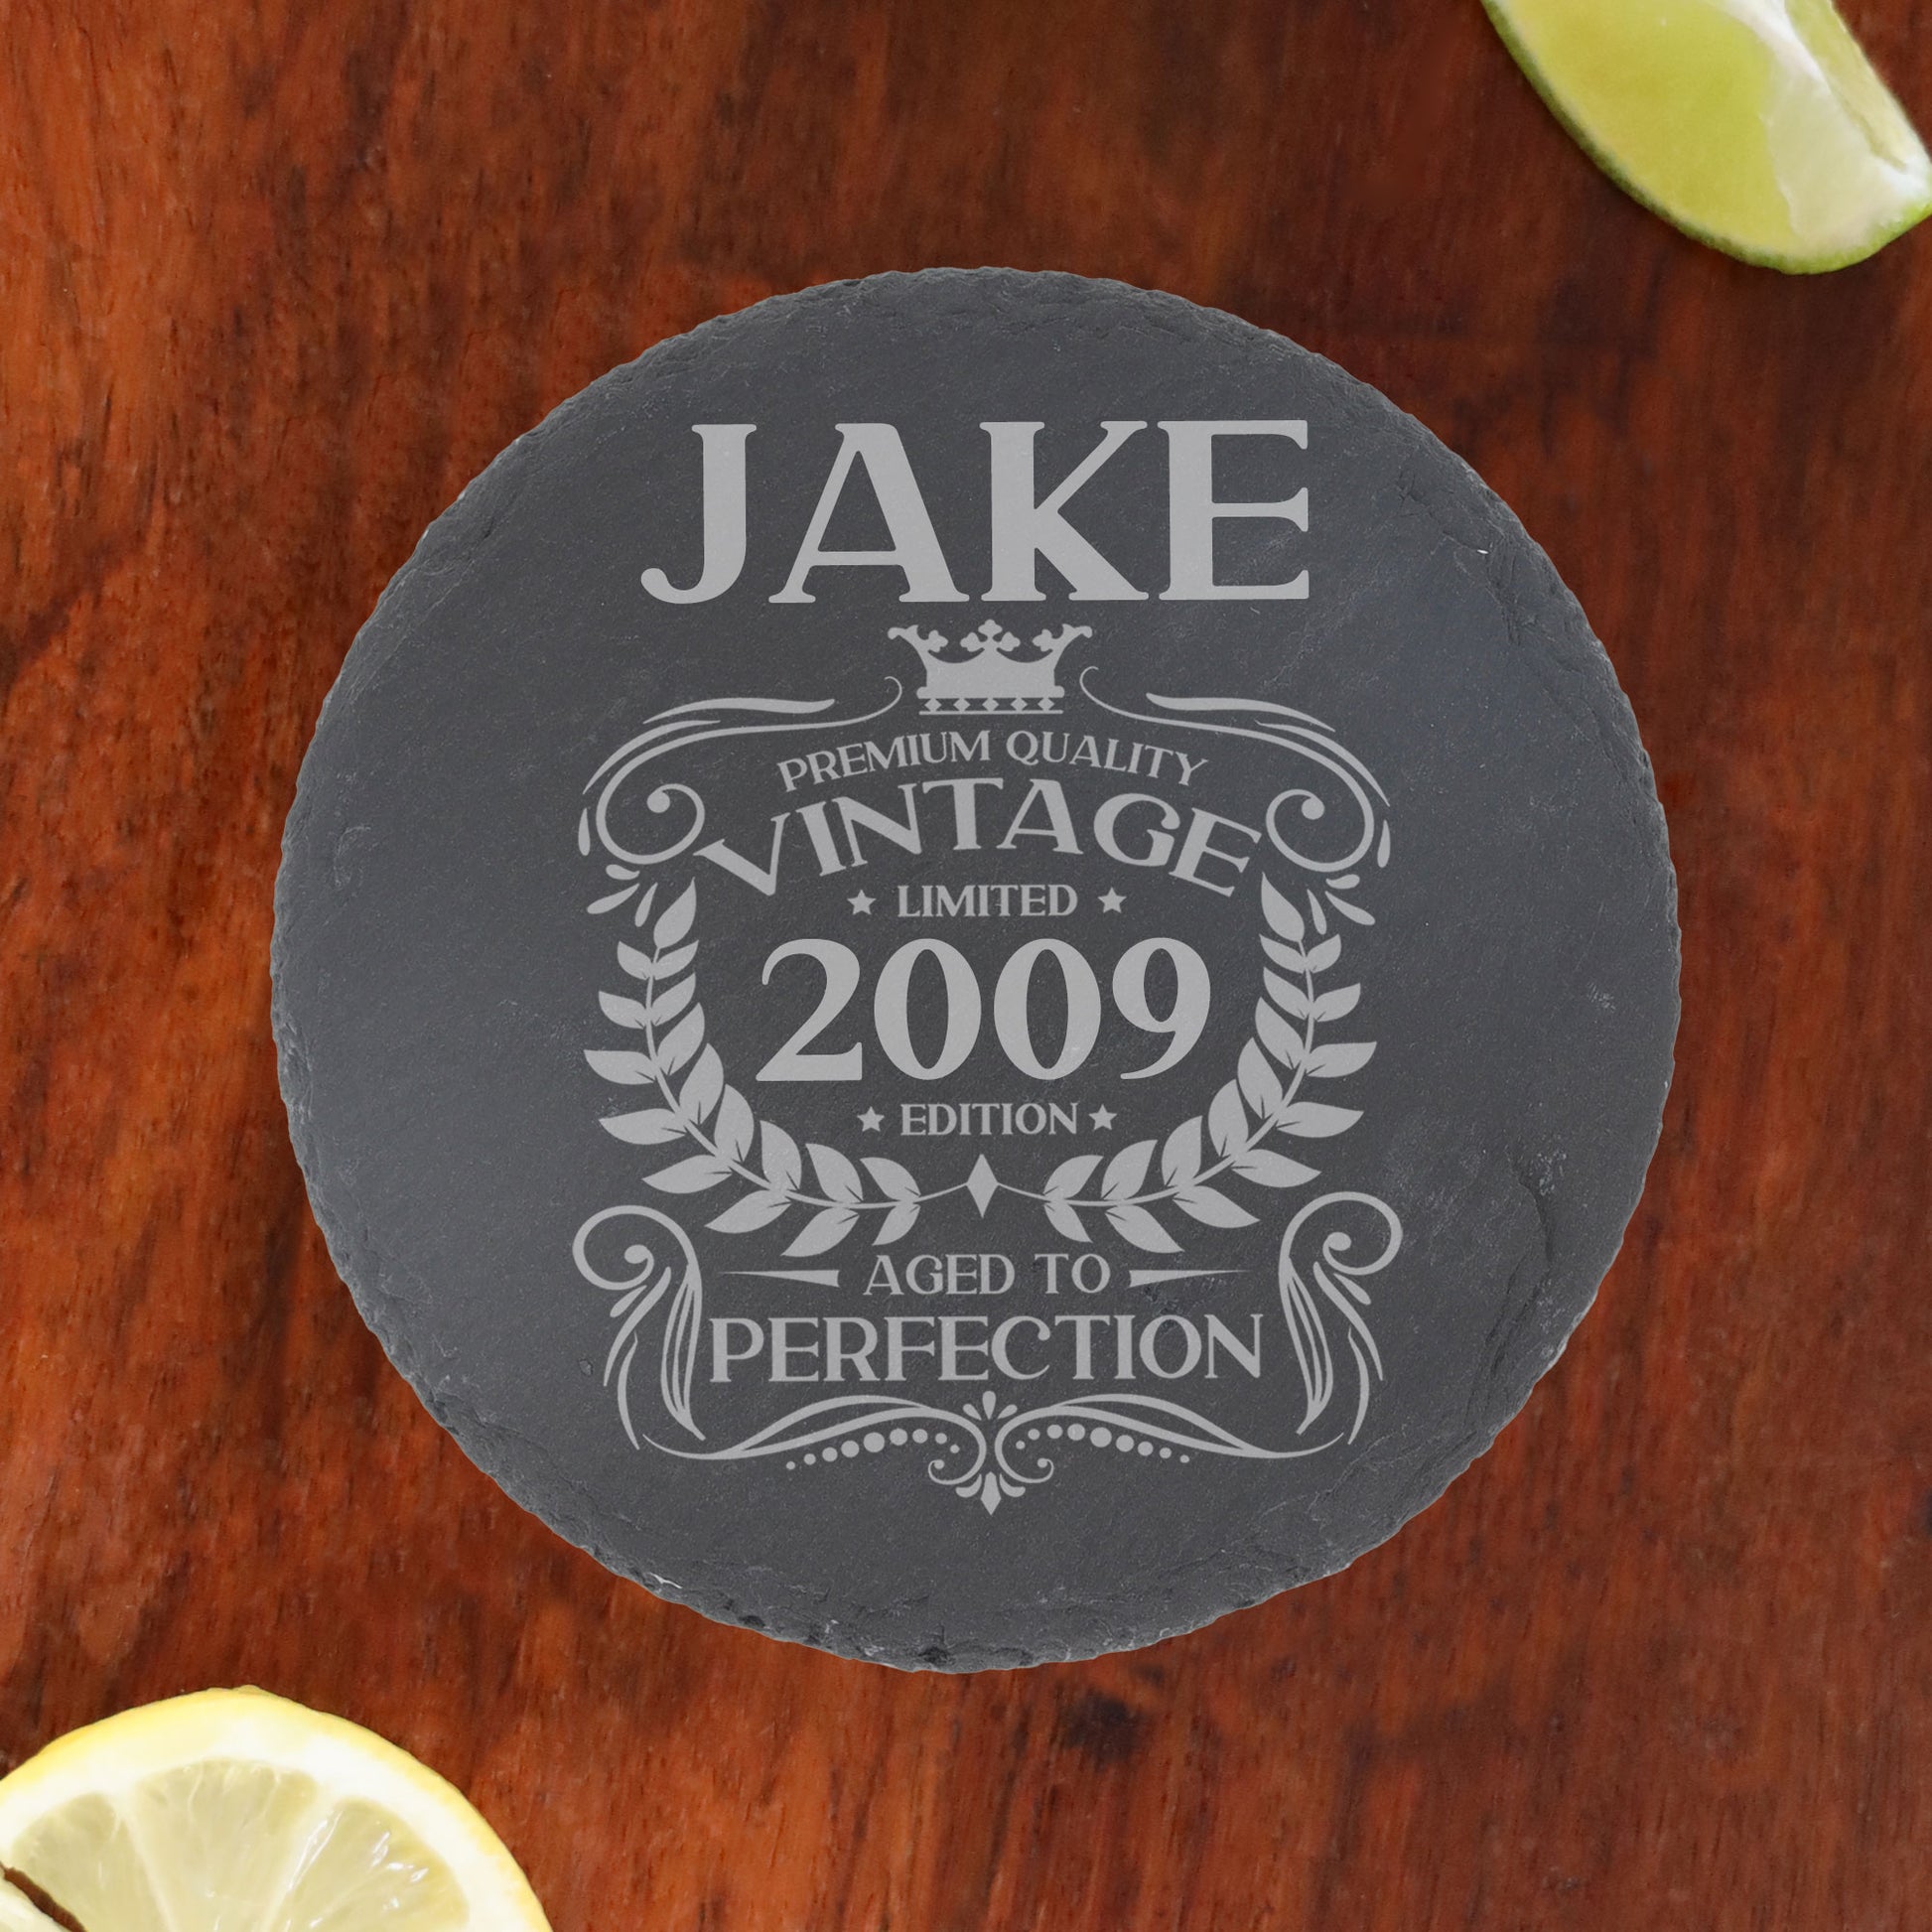 Personalised Vintage 2009 Mug and/or Coaster  - Always Looking Good - Round Coaster On Its Own  